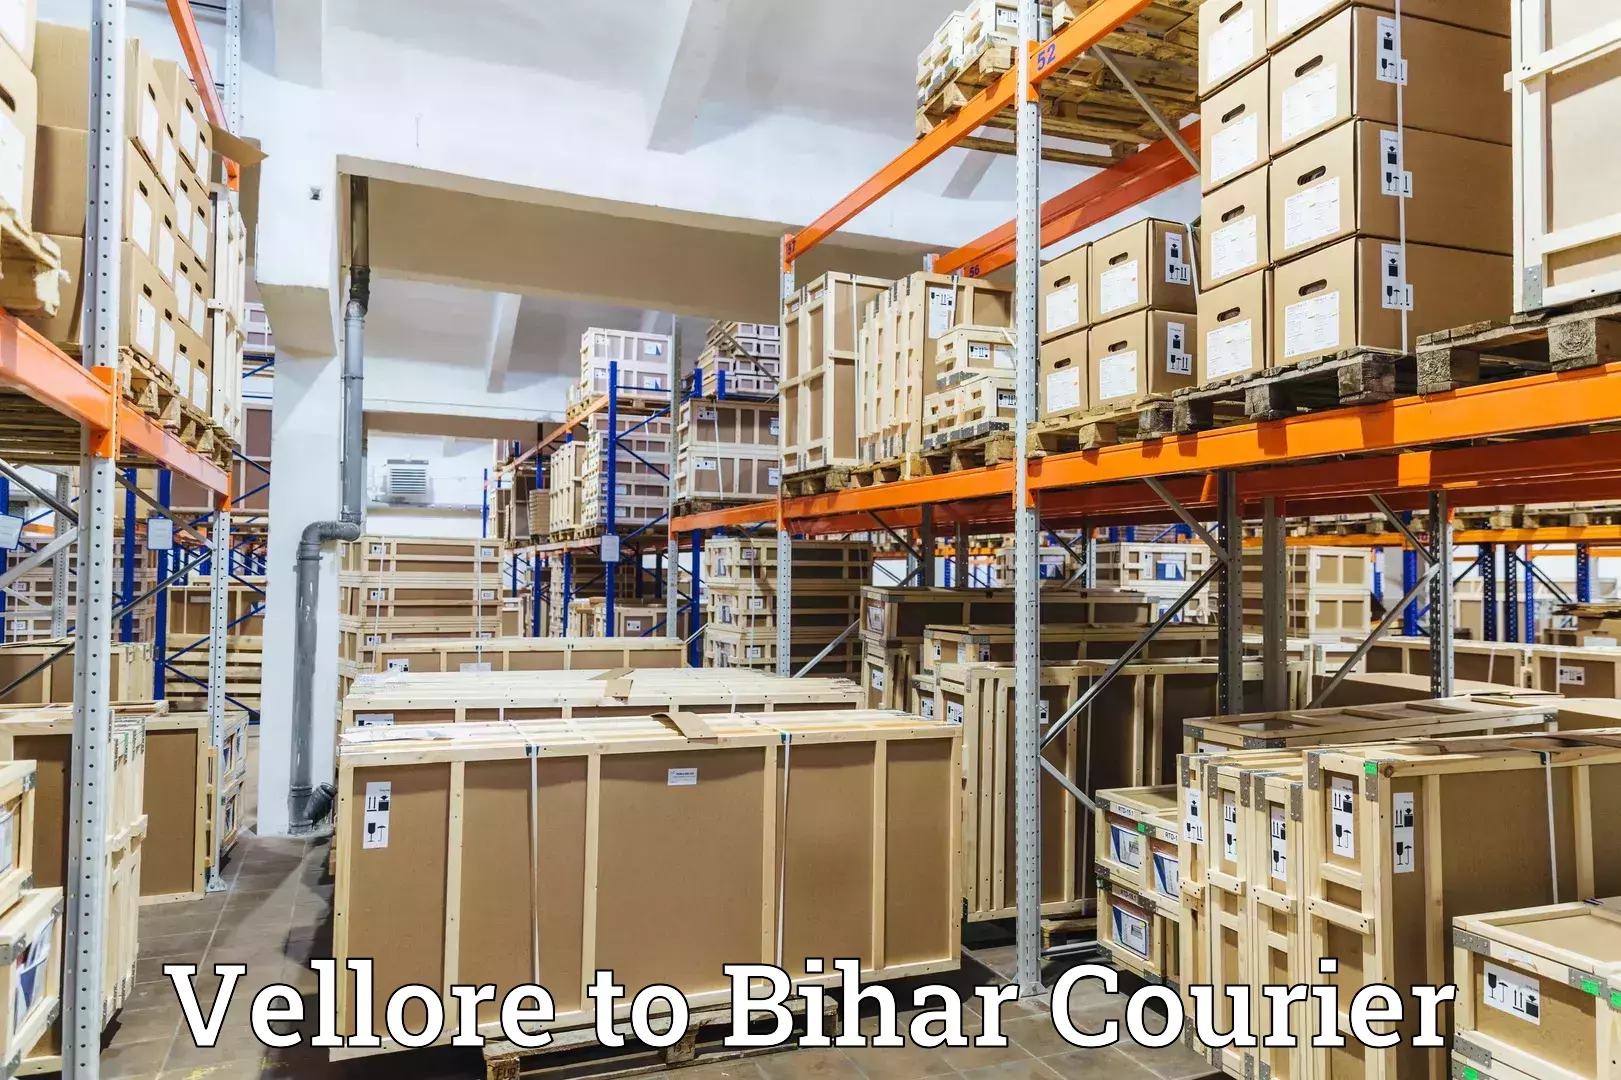 Efficient shipping operations Vellore to Bihar